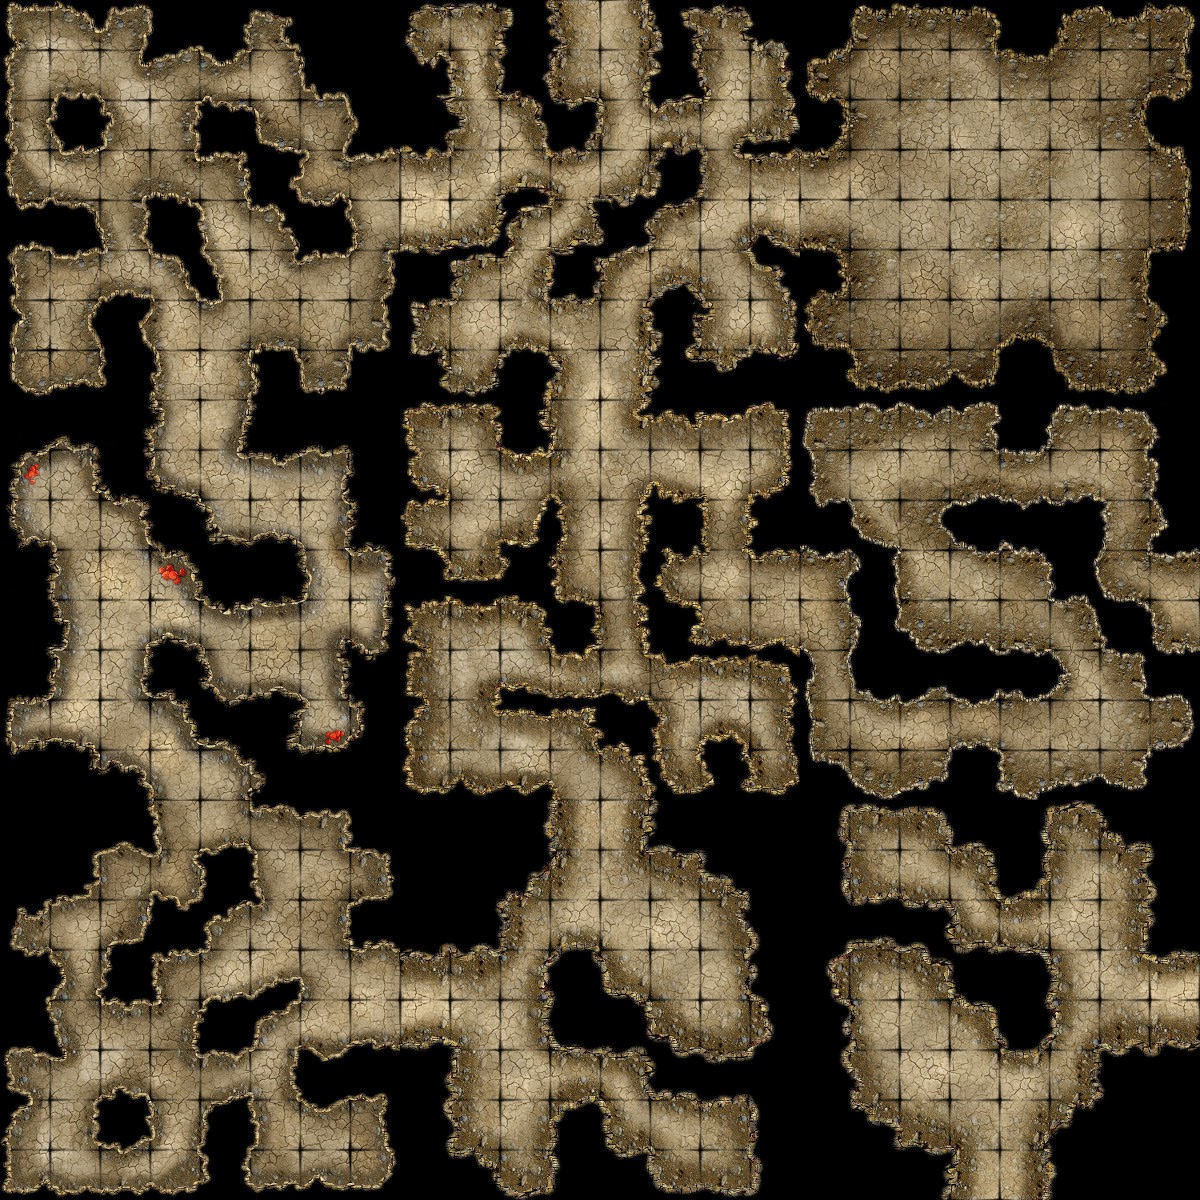 Free Dungeon Tiles To Print Exemple D agencement Des Cavernes G omorphes